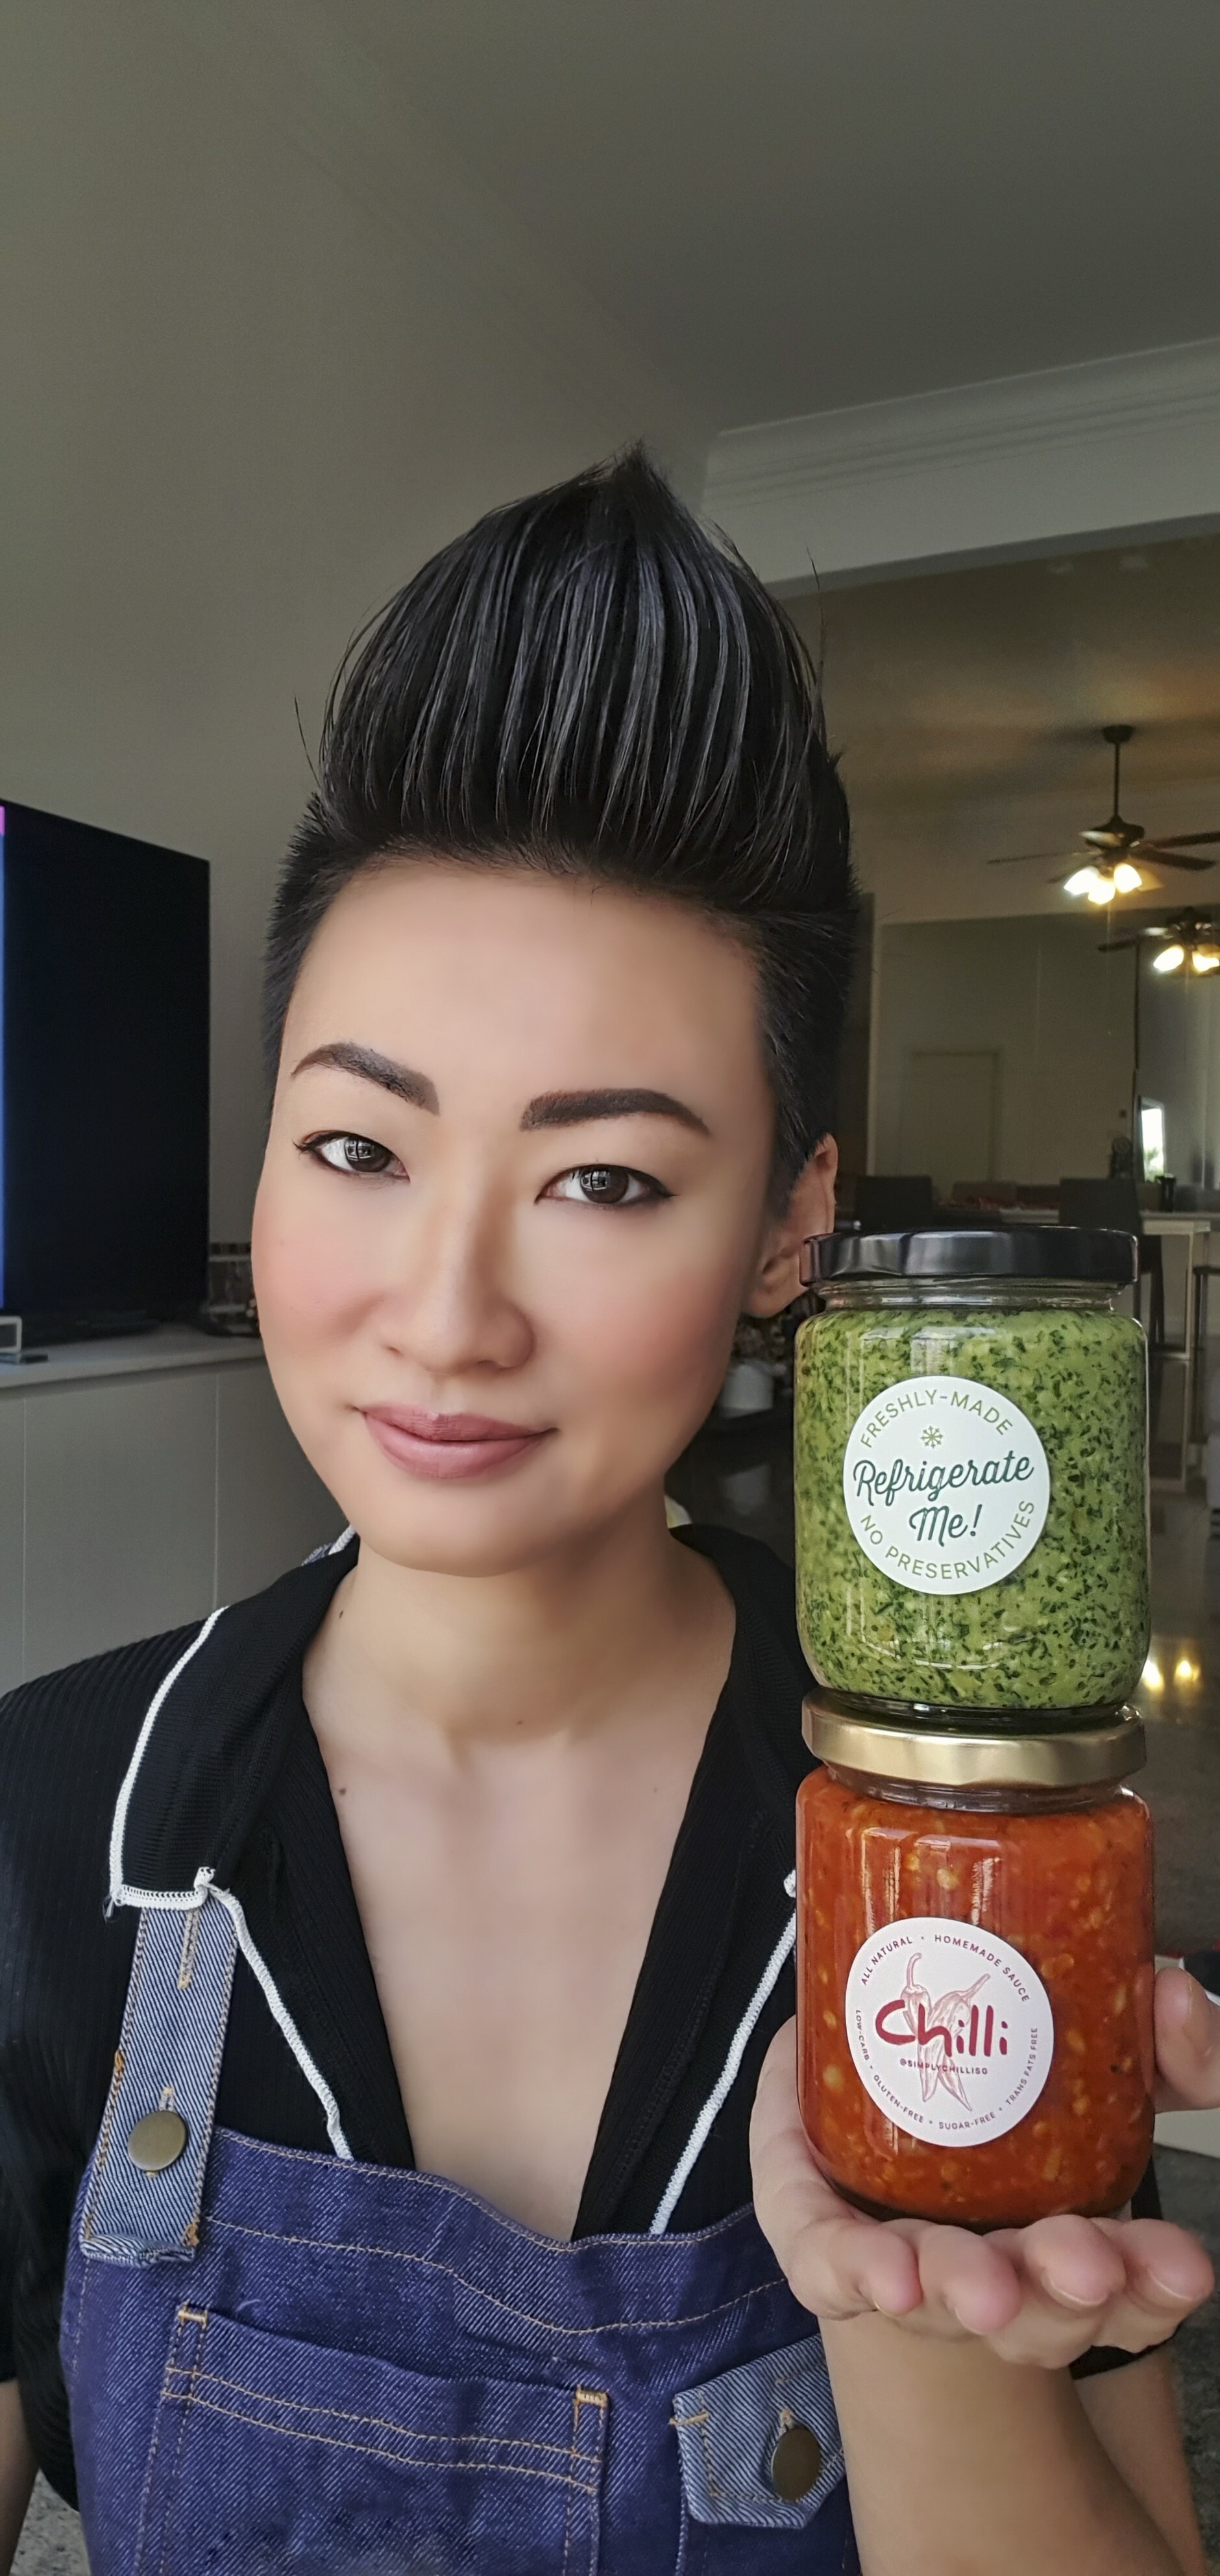 Esther Quek with jars of her chilli sauce and pesto.